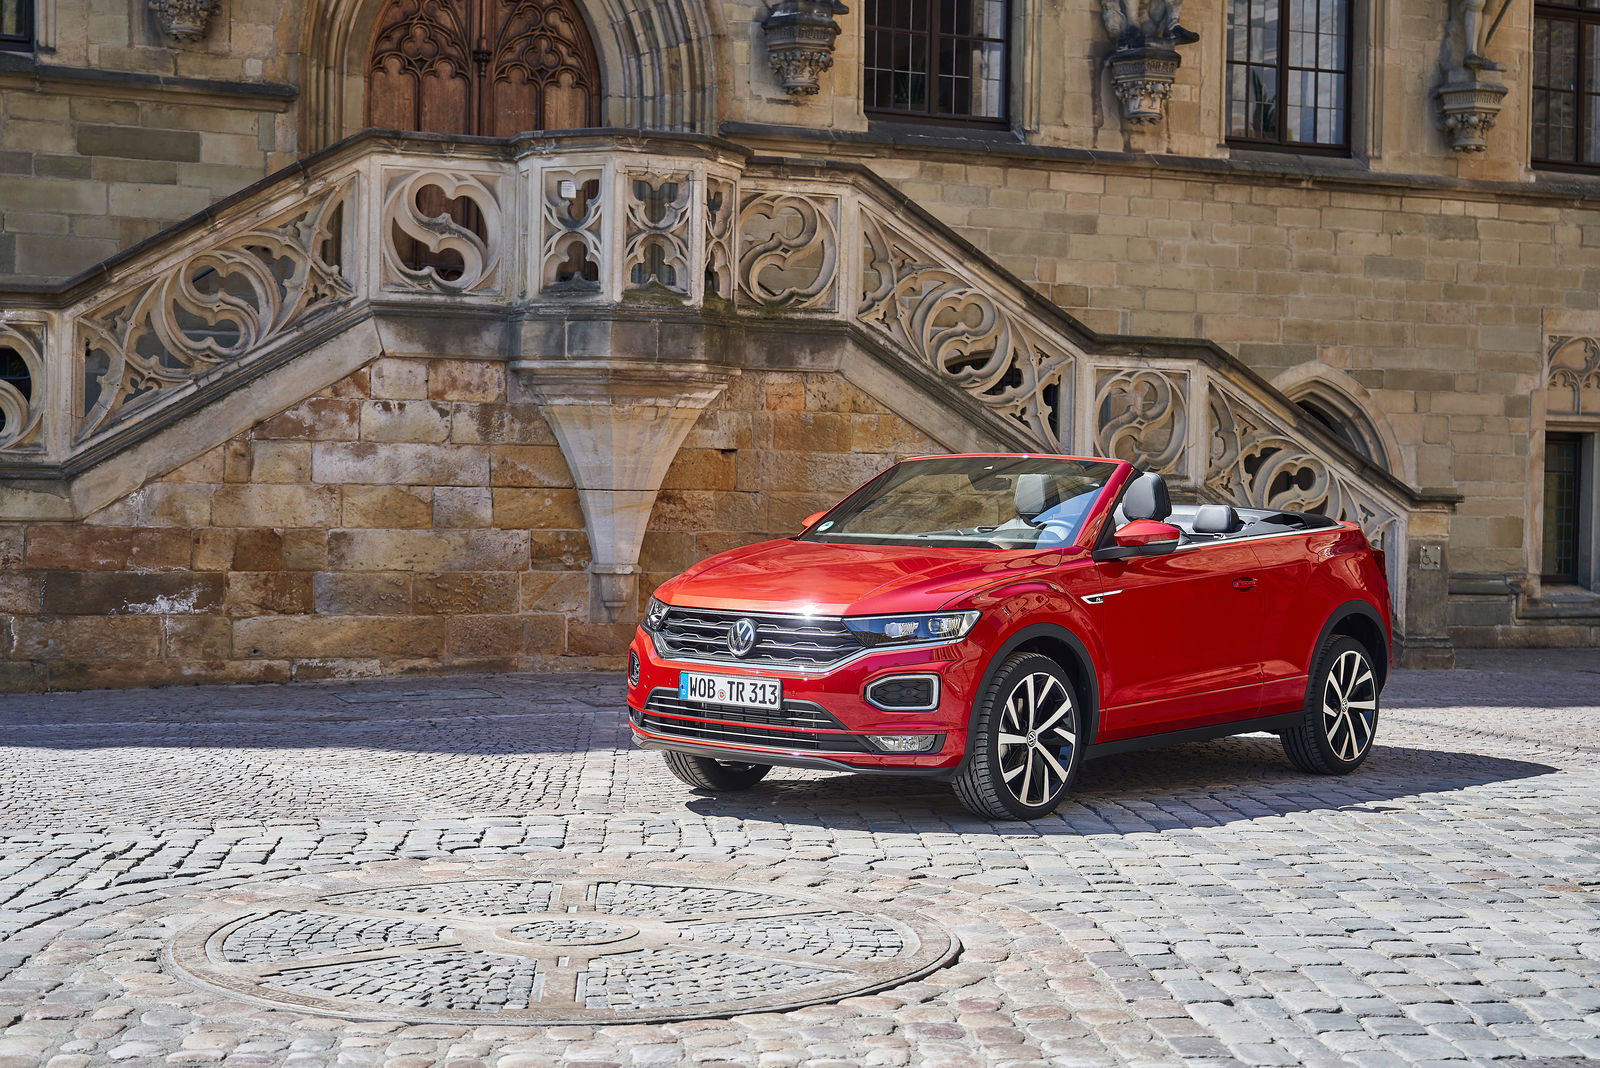 Story: "New signing from Osnabrück – the T-Roc Cabriolet"